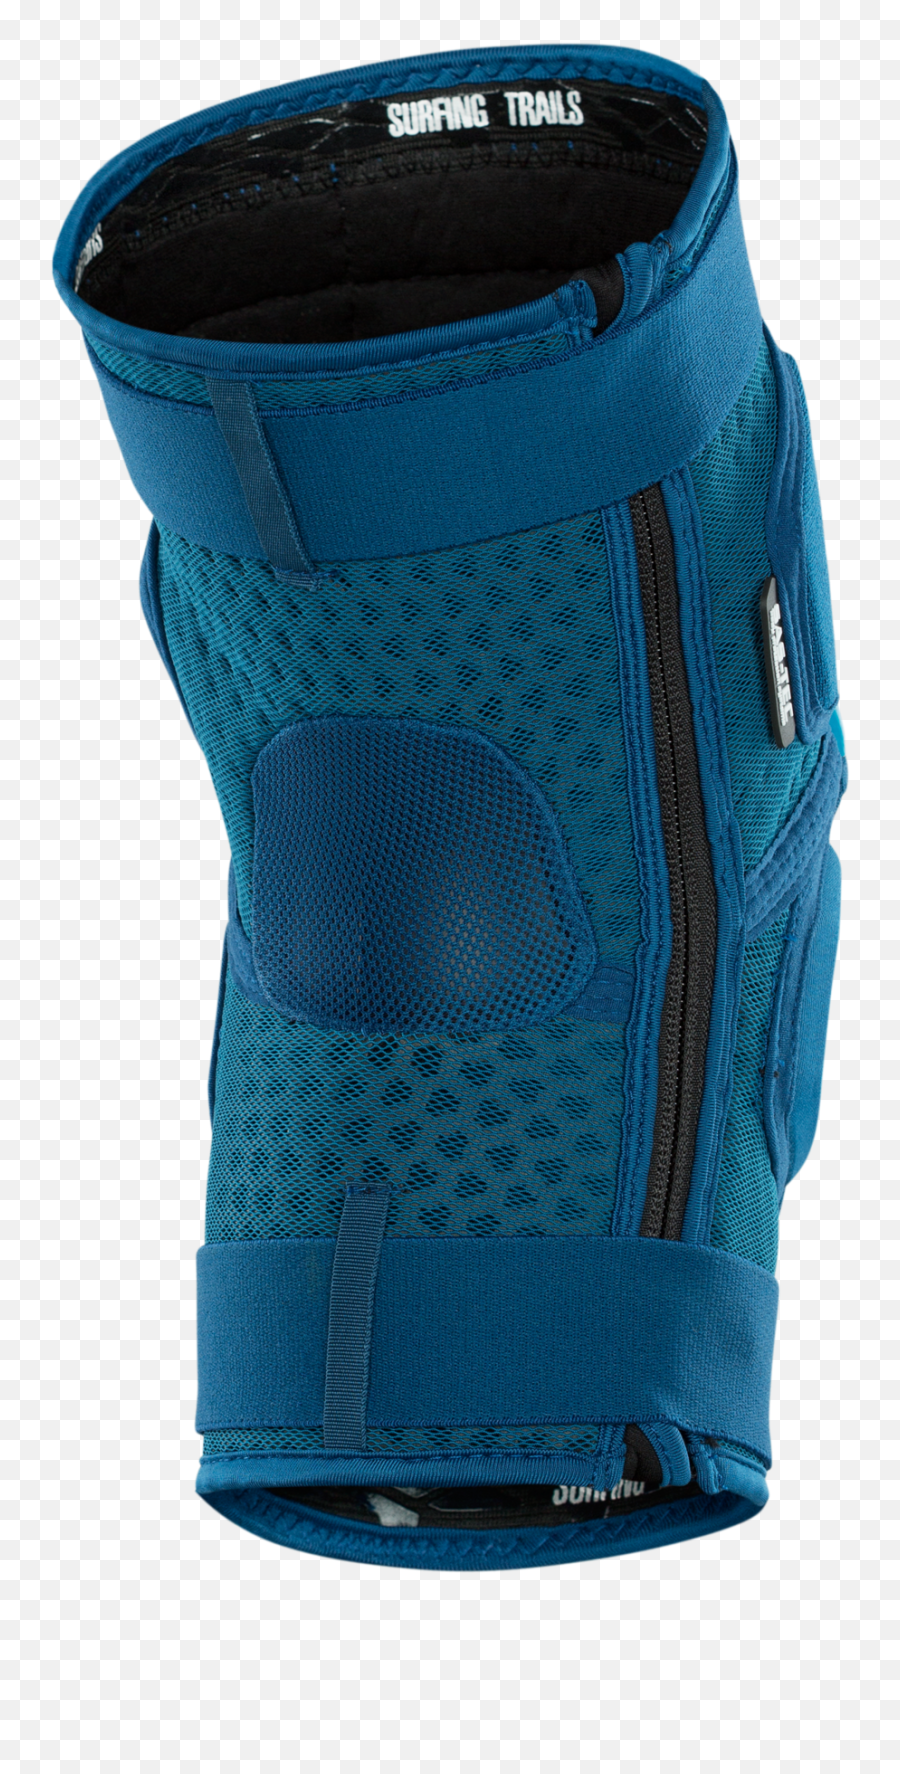 Ion K - Ion Zip Knee Pad Png,Icon Knee Shin Guards